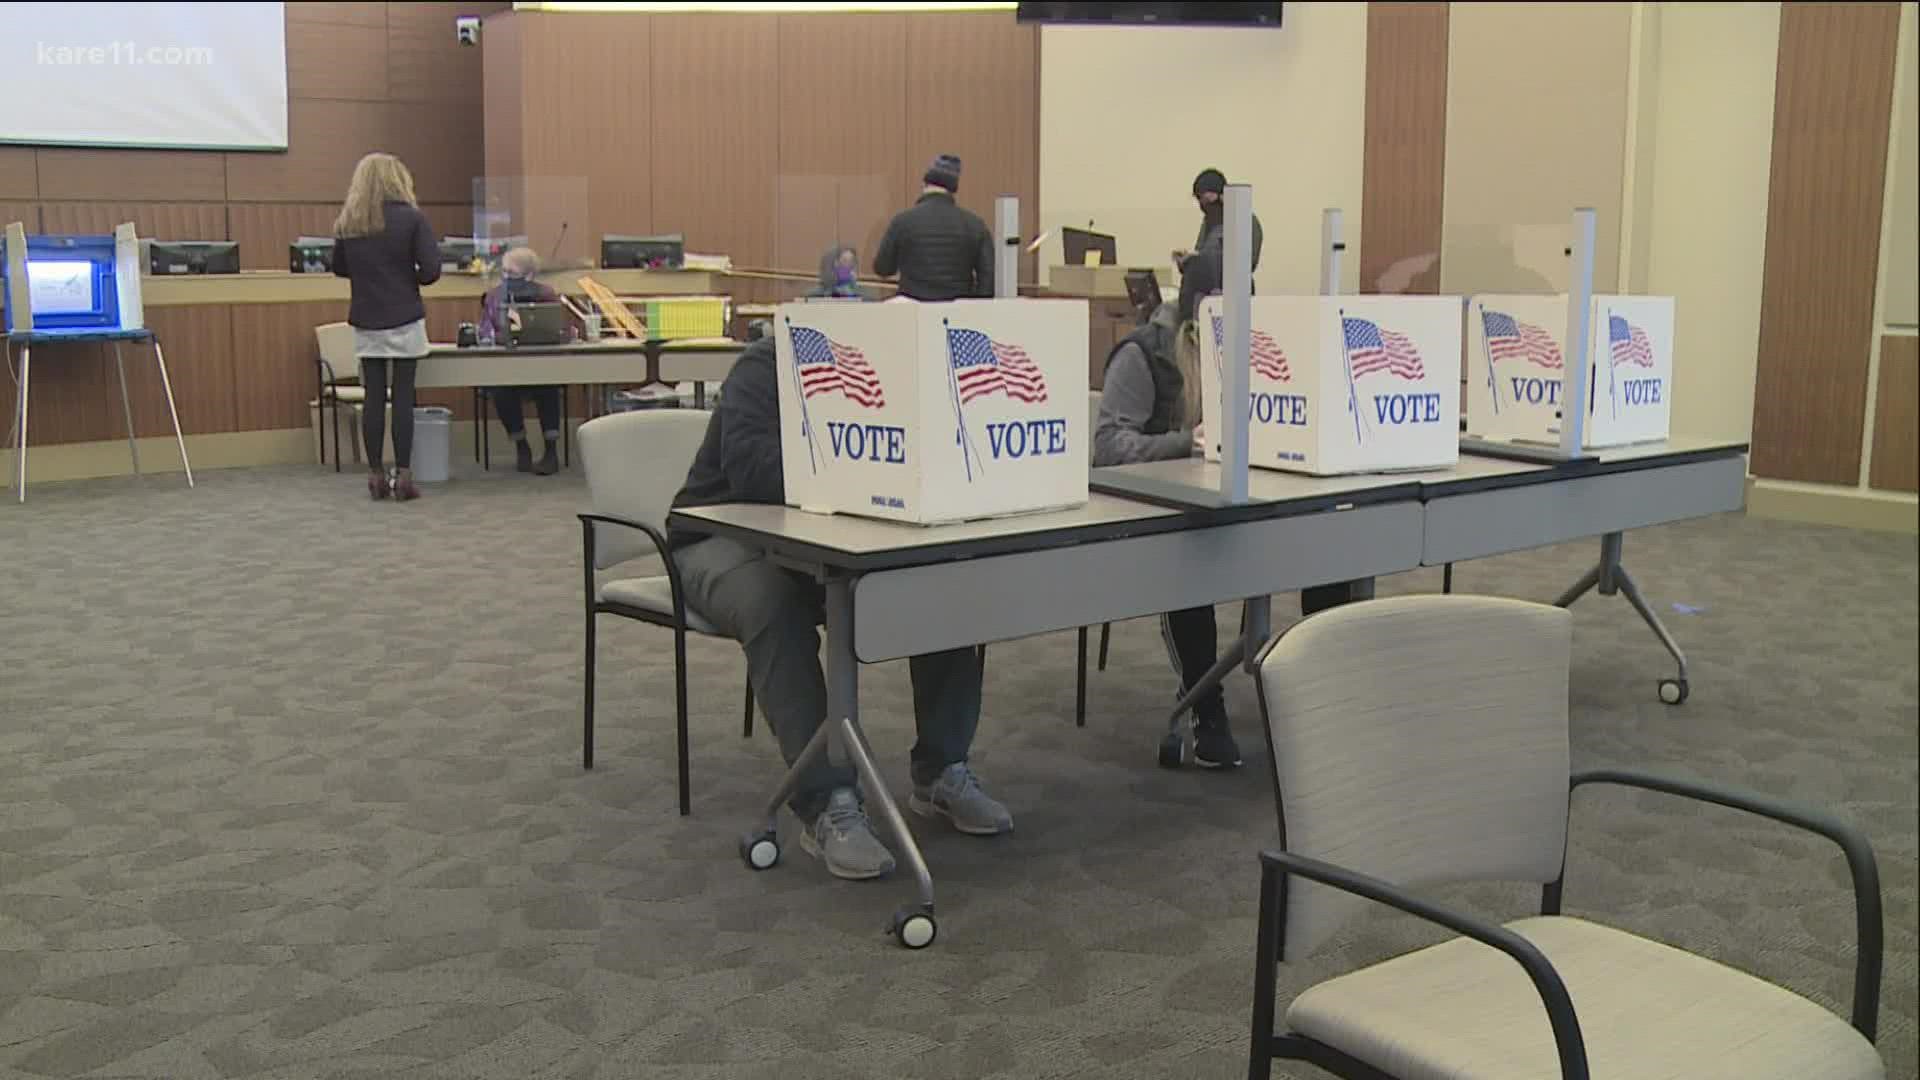 This year, five cities in the metro are using ranked-choice voting in their city elections. KARE 11’s John Croman walks us through how that system works.